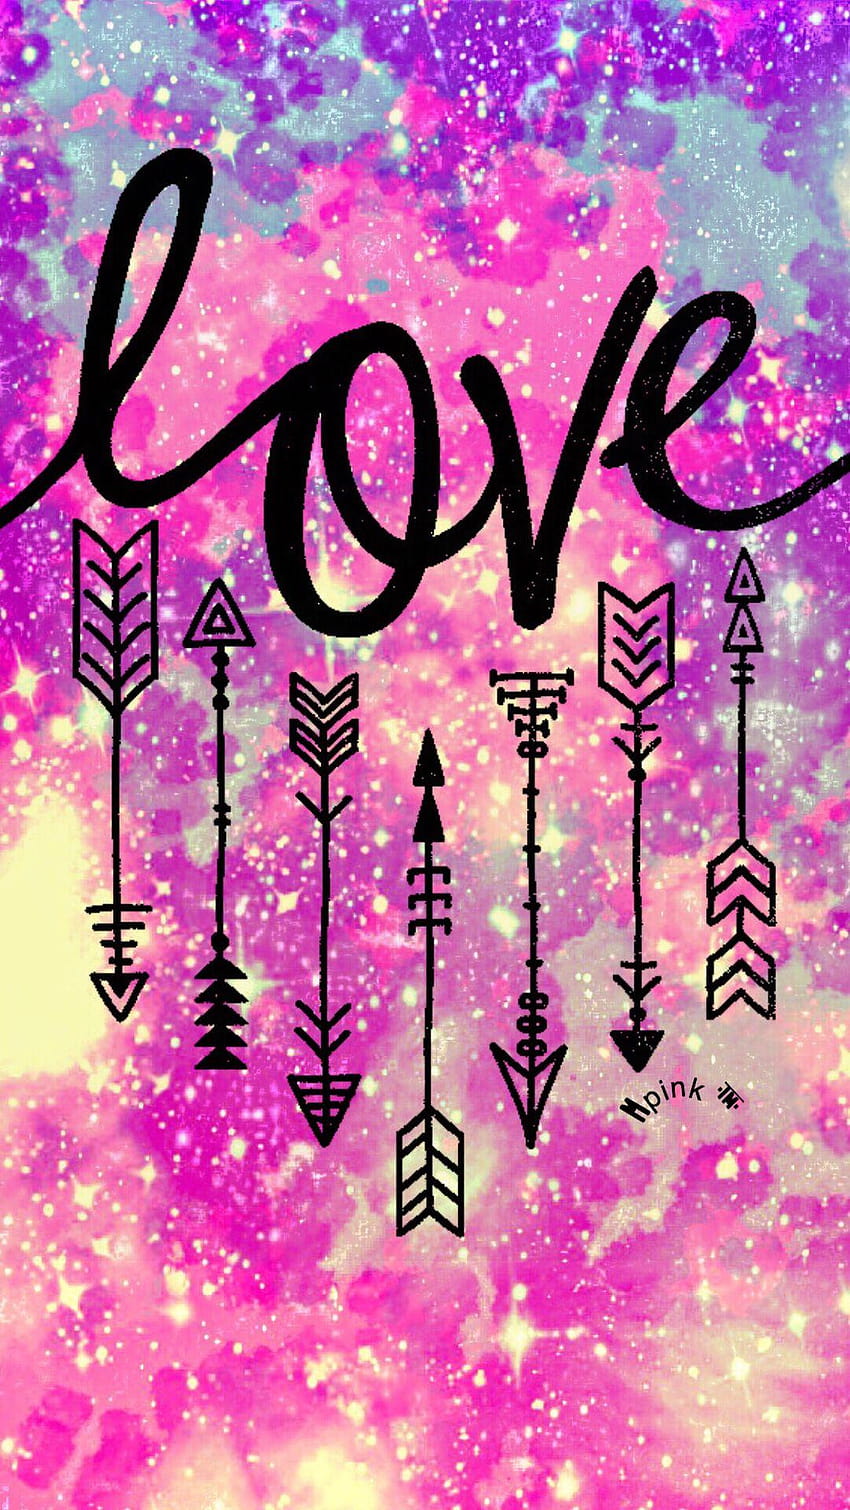 Love Hipster Arrows Galaxy iPhone/Android, kawaii hipster HD phone wallpaper